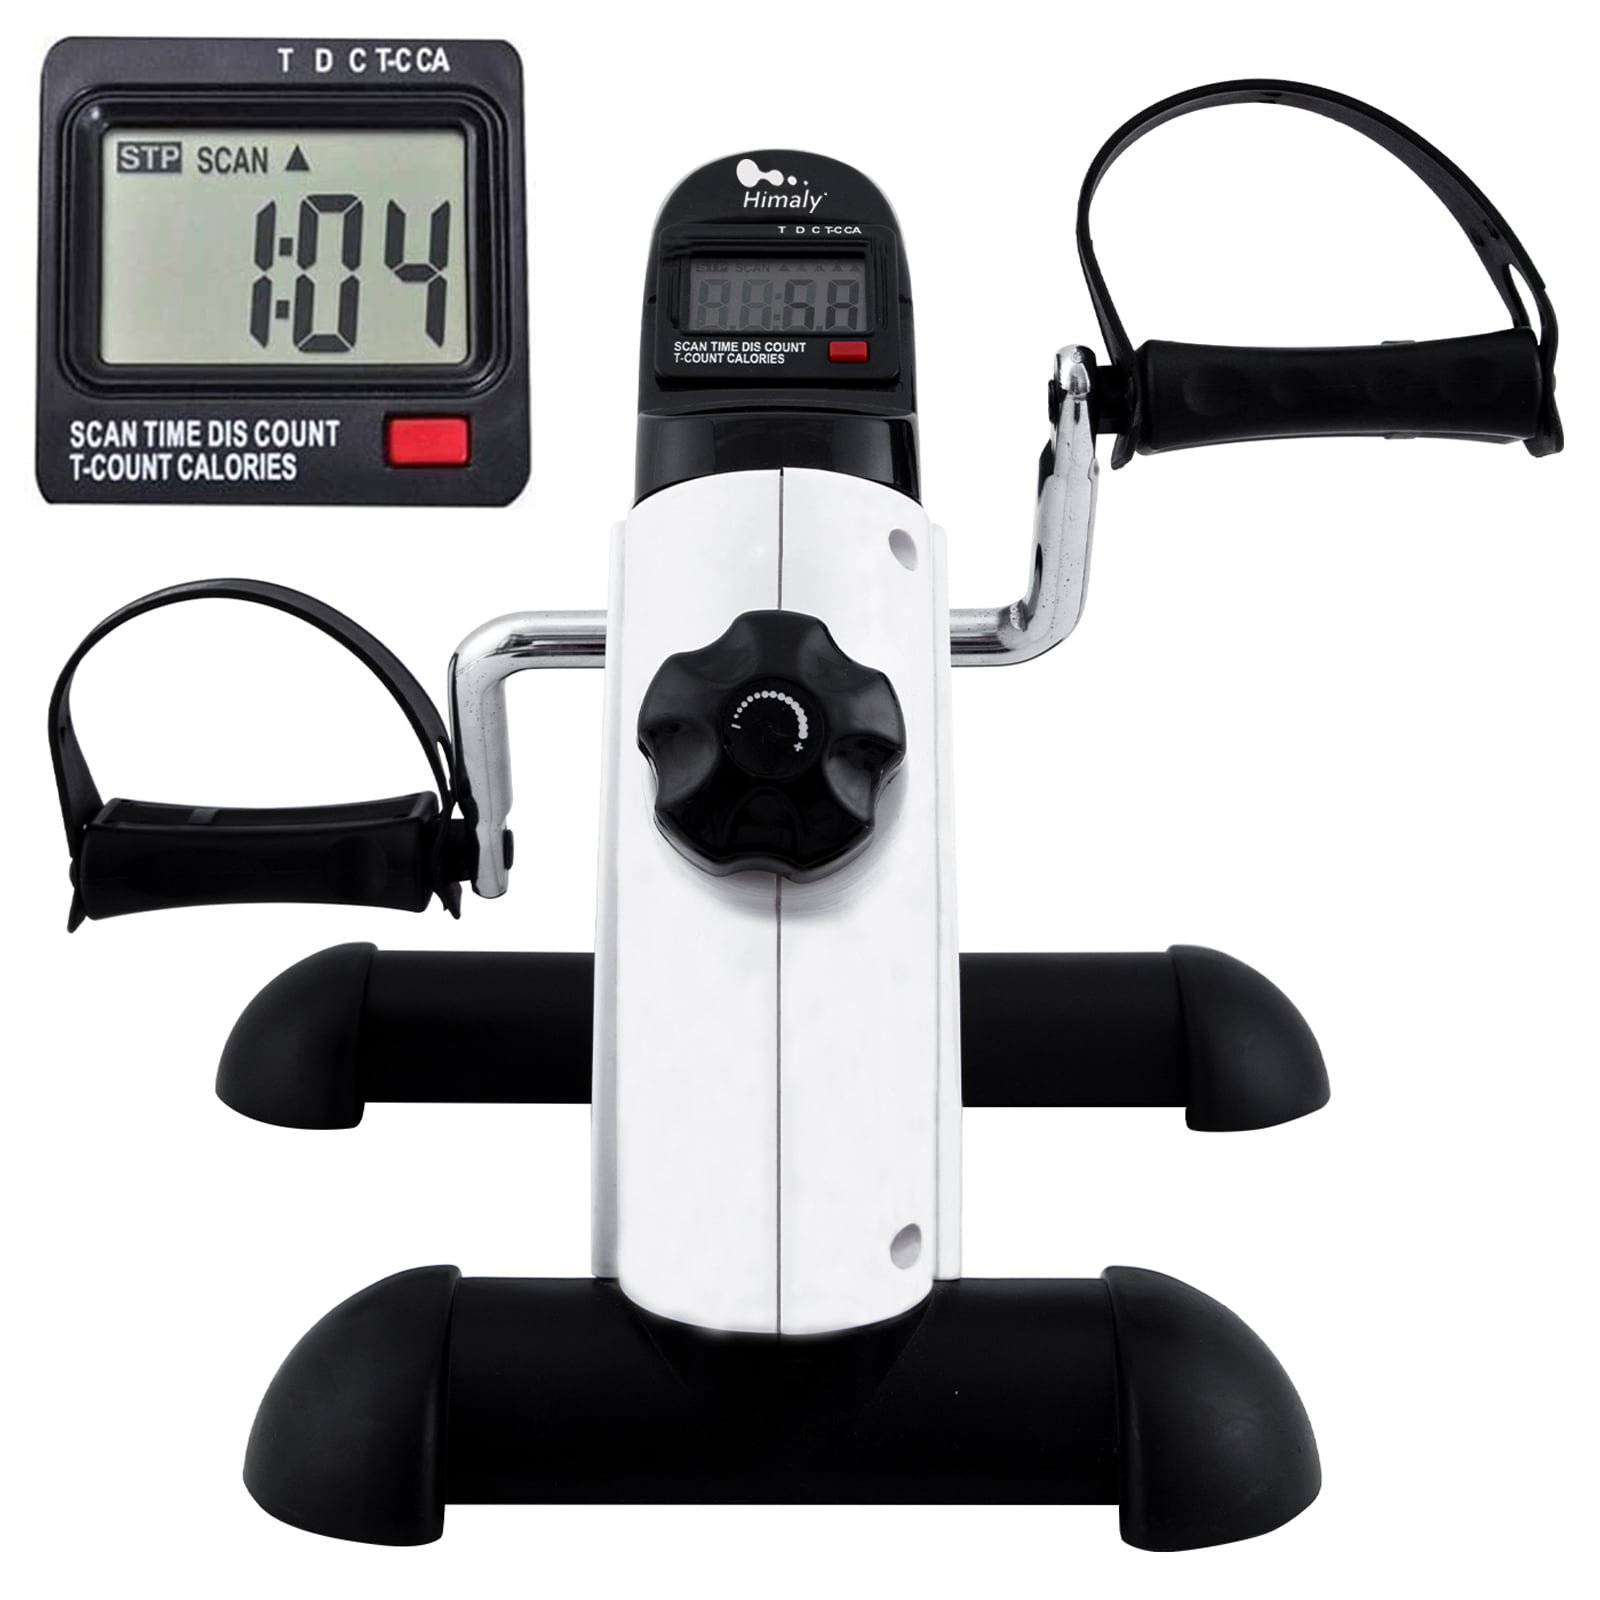 Exefit Mni Exercise Bike Pedal Exerciser Stationary Peddler with Digital LCD for sale online 